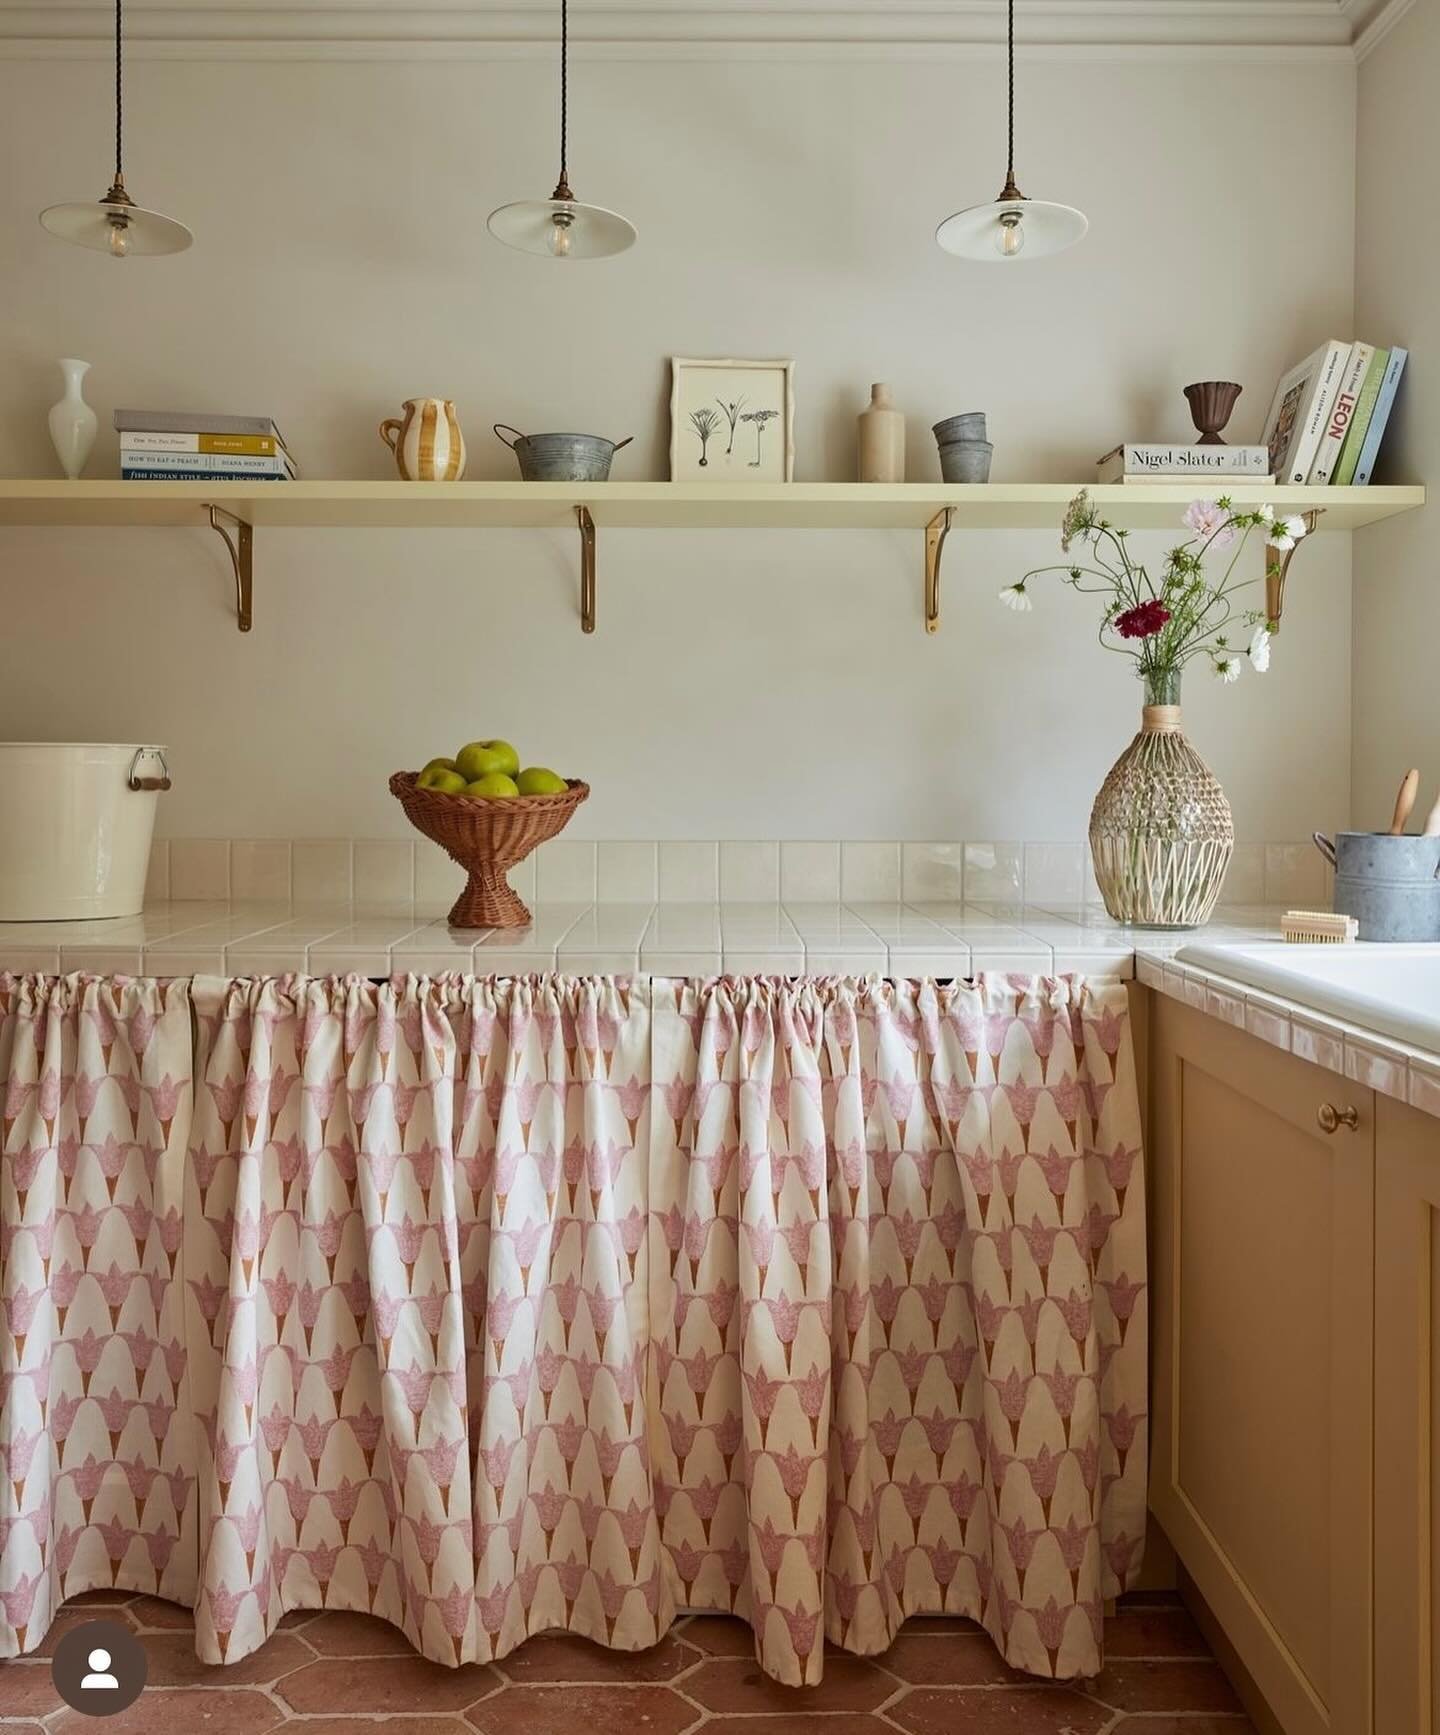 Rooms that are oozing &lsquo;Springtime&rsquo; vibes. 🌼

1 - Those mundane tasks don&rsquo;t seem as boring anymore when you have a utility room like this! 

2 - Florals, wall lamps &amp; gorgeous pink tiles = bathroom goals by @vaughan_d_d 

3 - Th